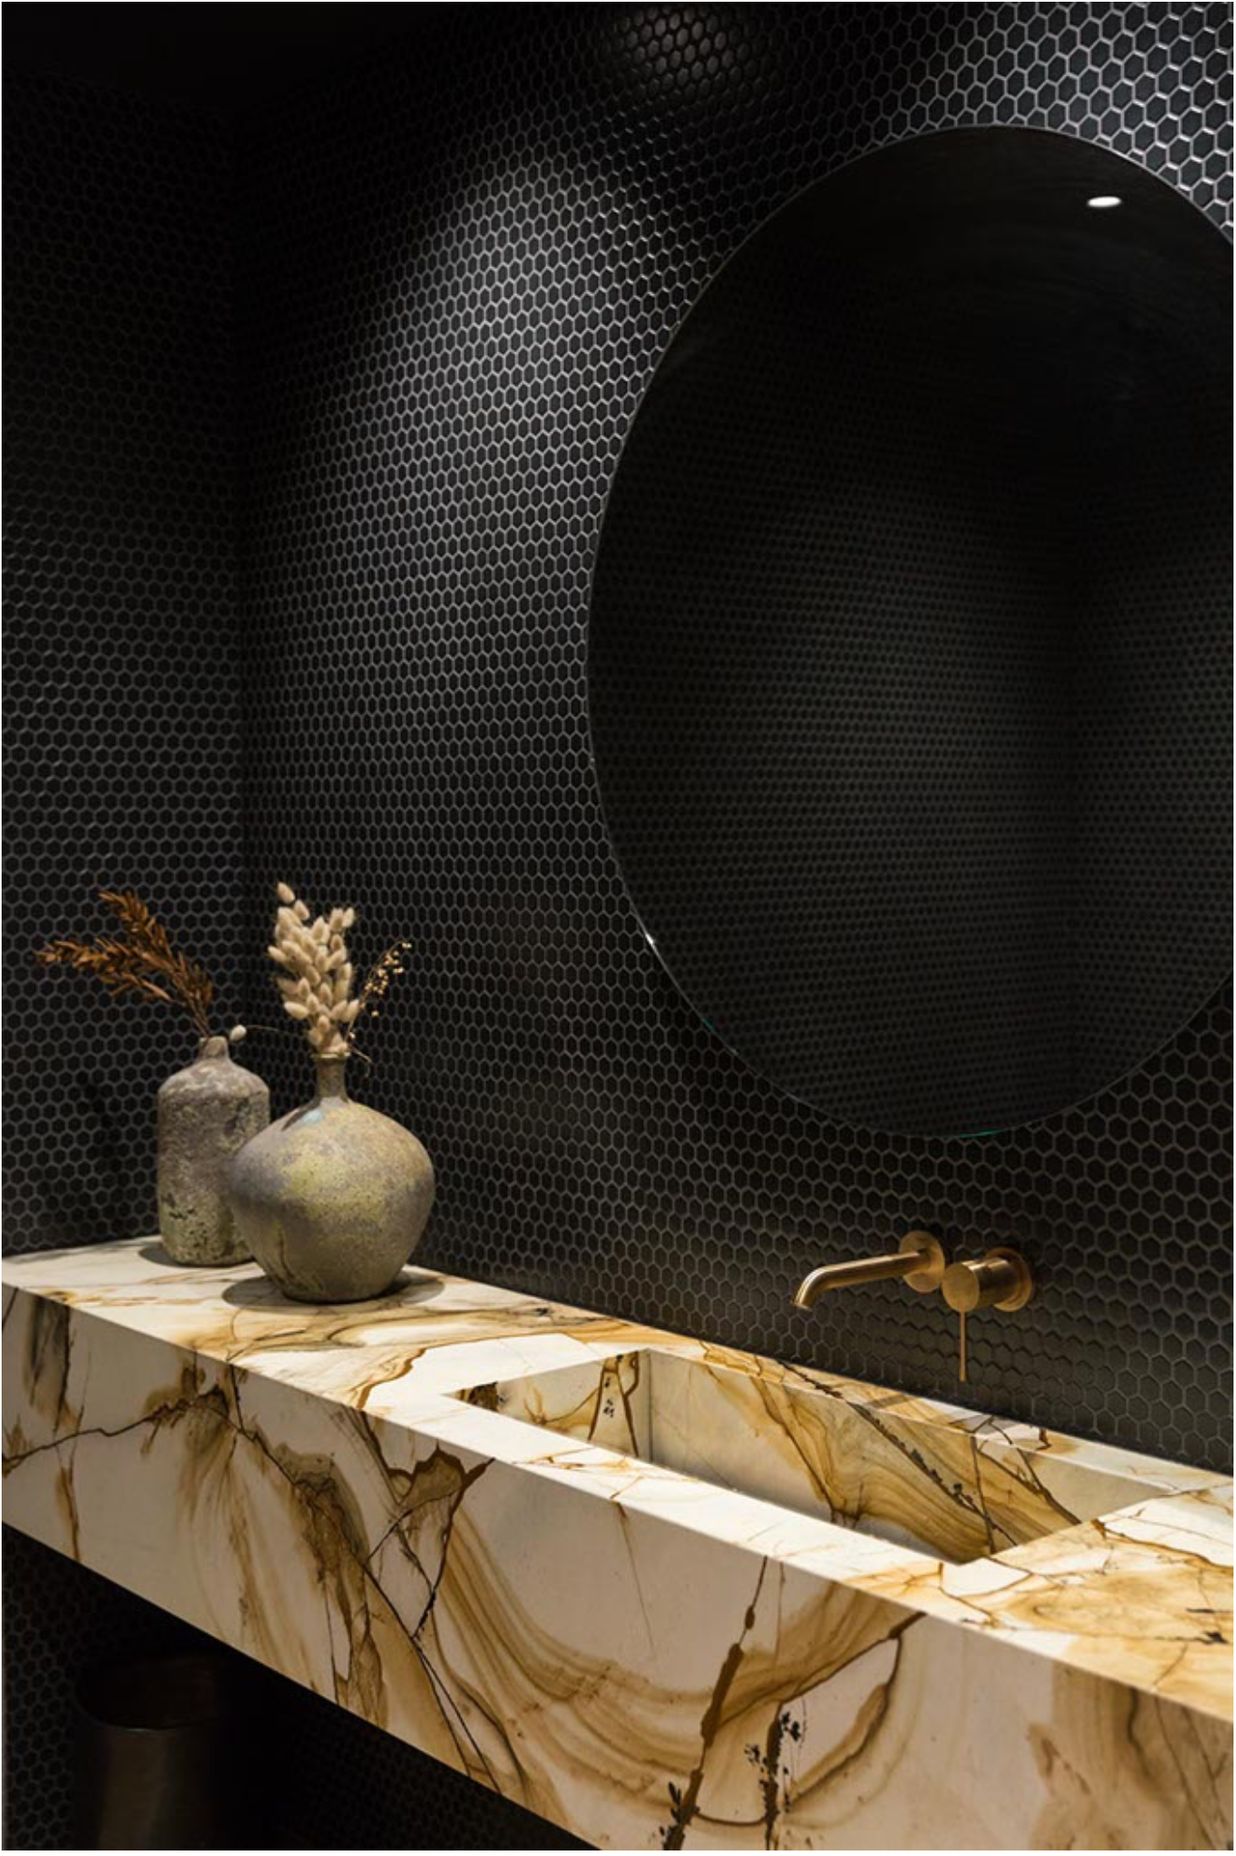 Bespoke handcrafted integrated hand basin and vanity crafted by our artisan stone specialists, Granite Workshop